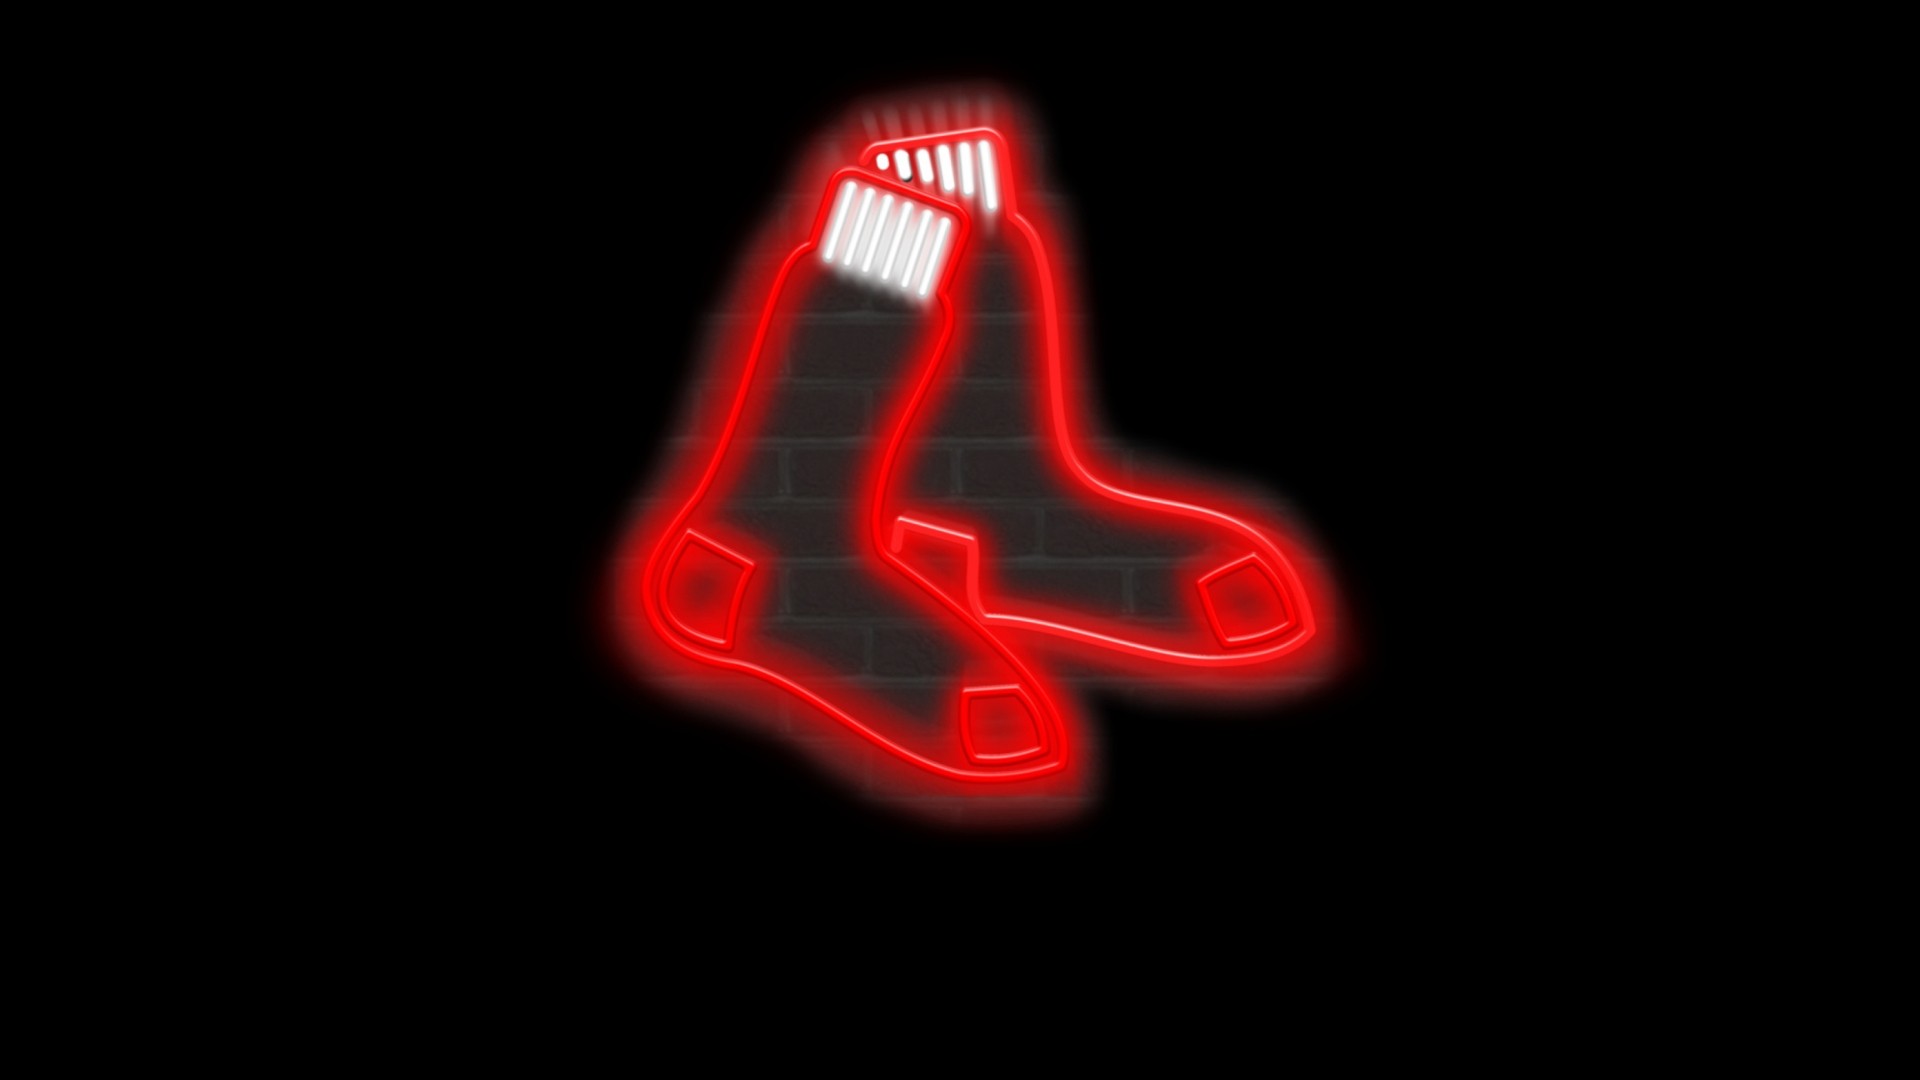 Red Sox Background Wallpaper